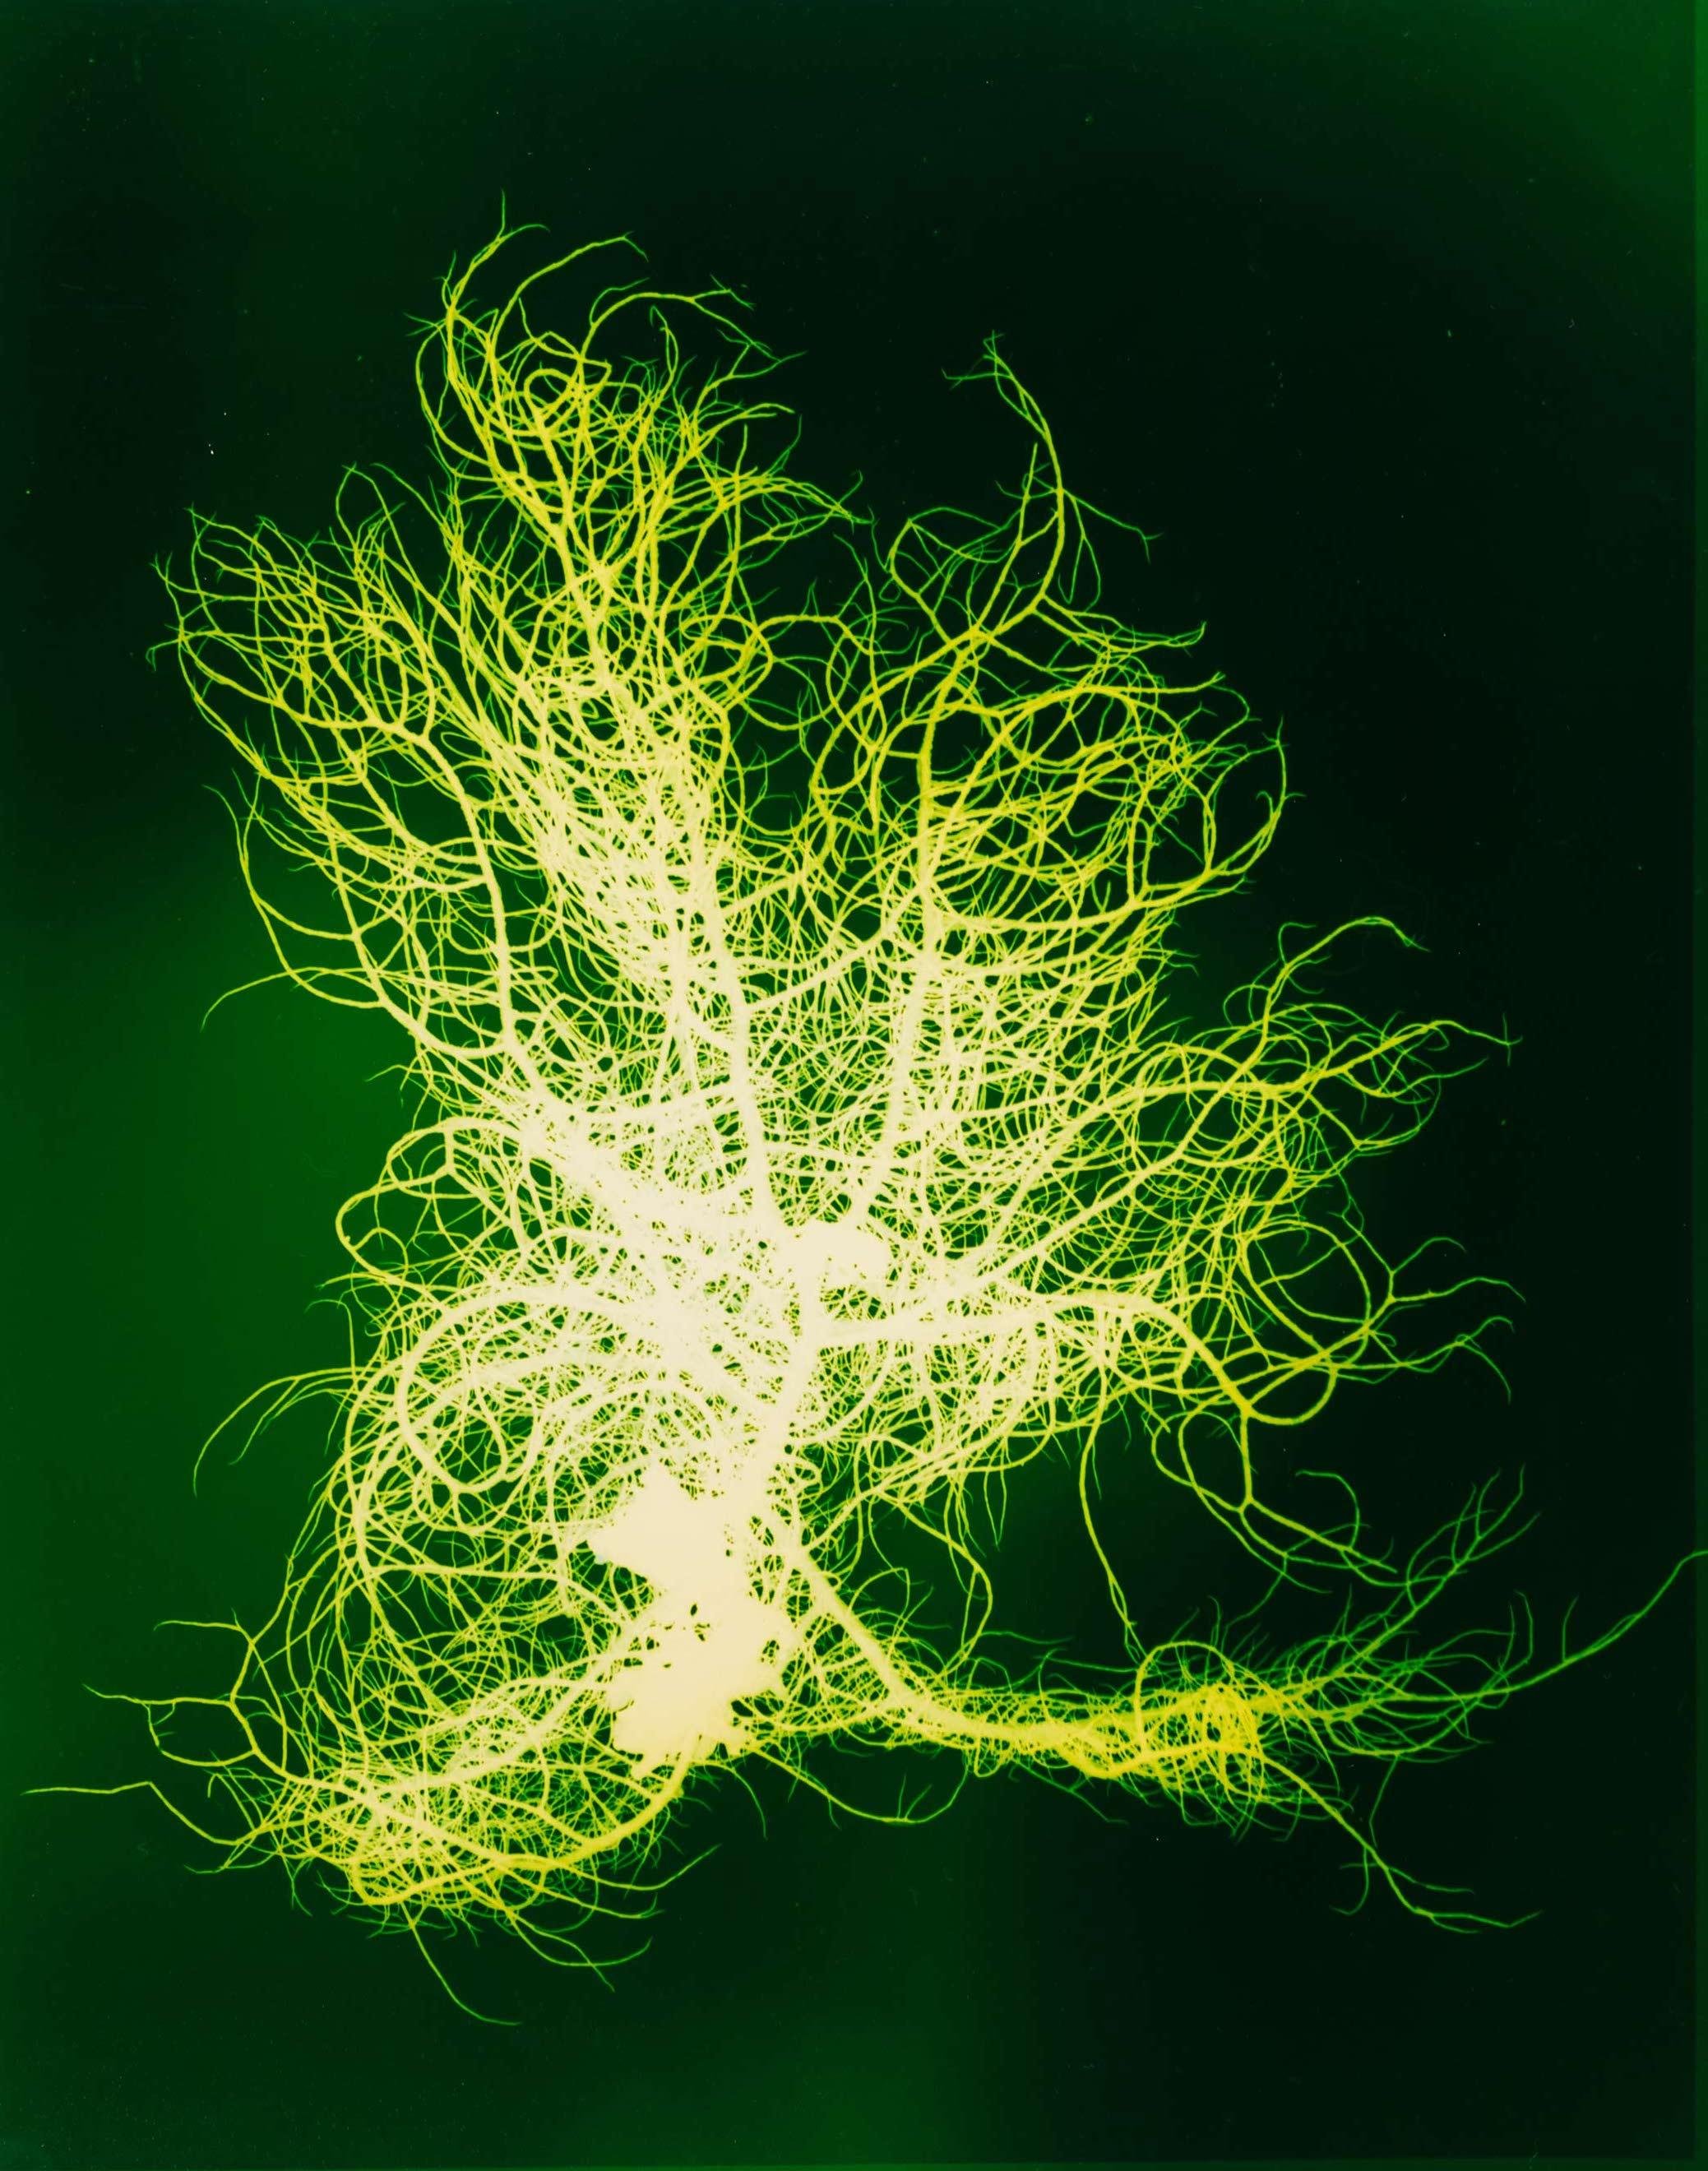 Regina Hügli
Lychen (Nr. 2/1)
2023
Photogram, framed behind glas
52 x 42 cm (30 x 24 cm)
Unique

For quite some time now, the photo artist Regina Hügli has occupied herself with water and the phenomenon of arborisation and budding. Regardless of